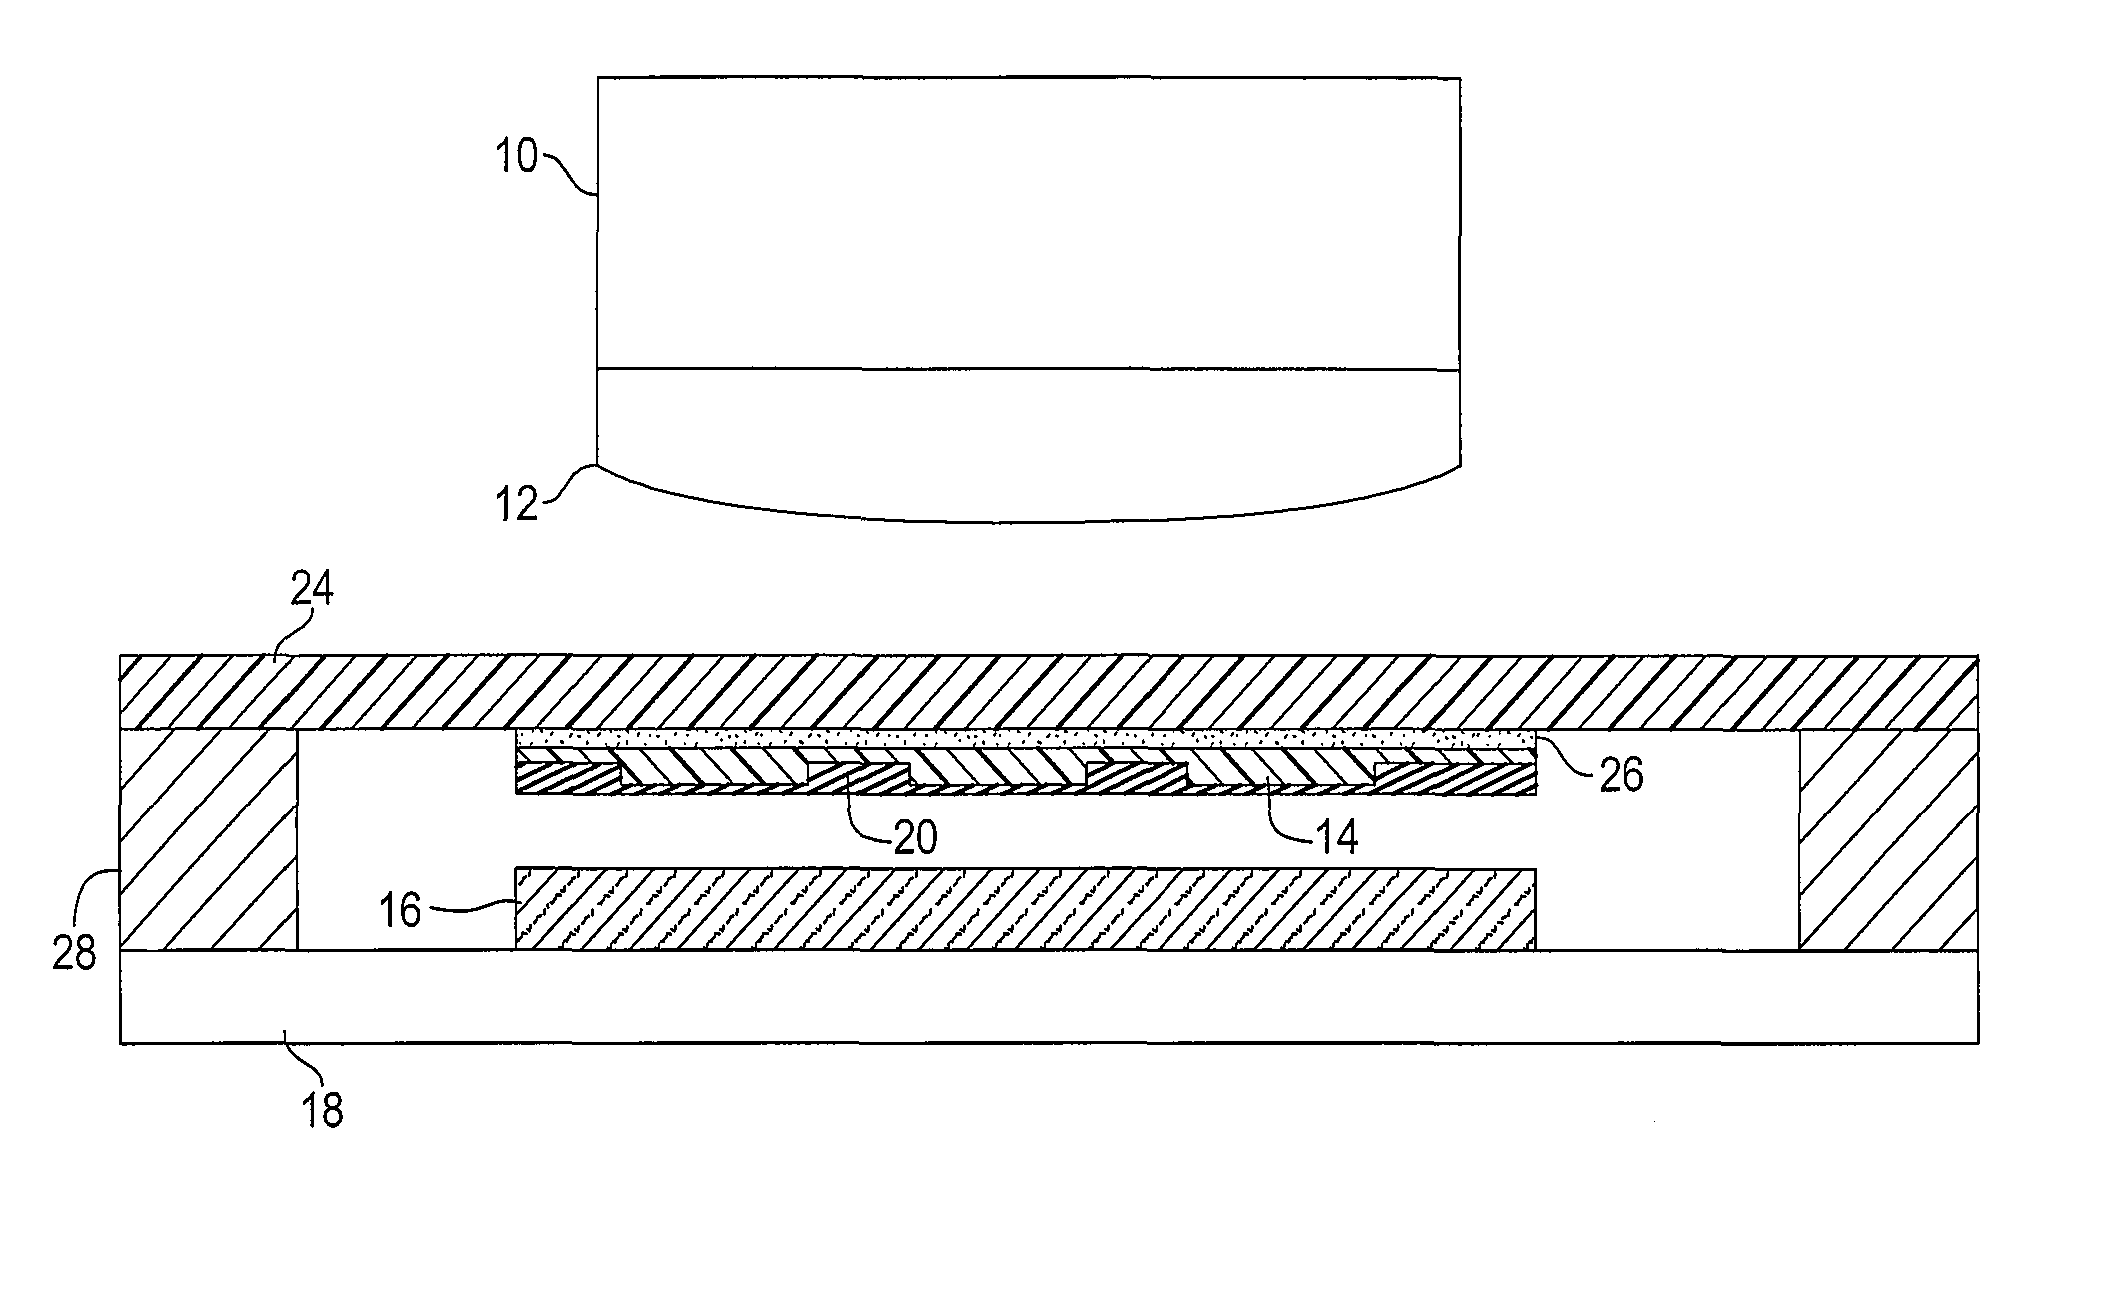 Molecular transfer lithography apparatus and method for transferring patterned materials to a substrate